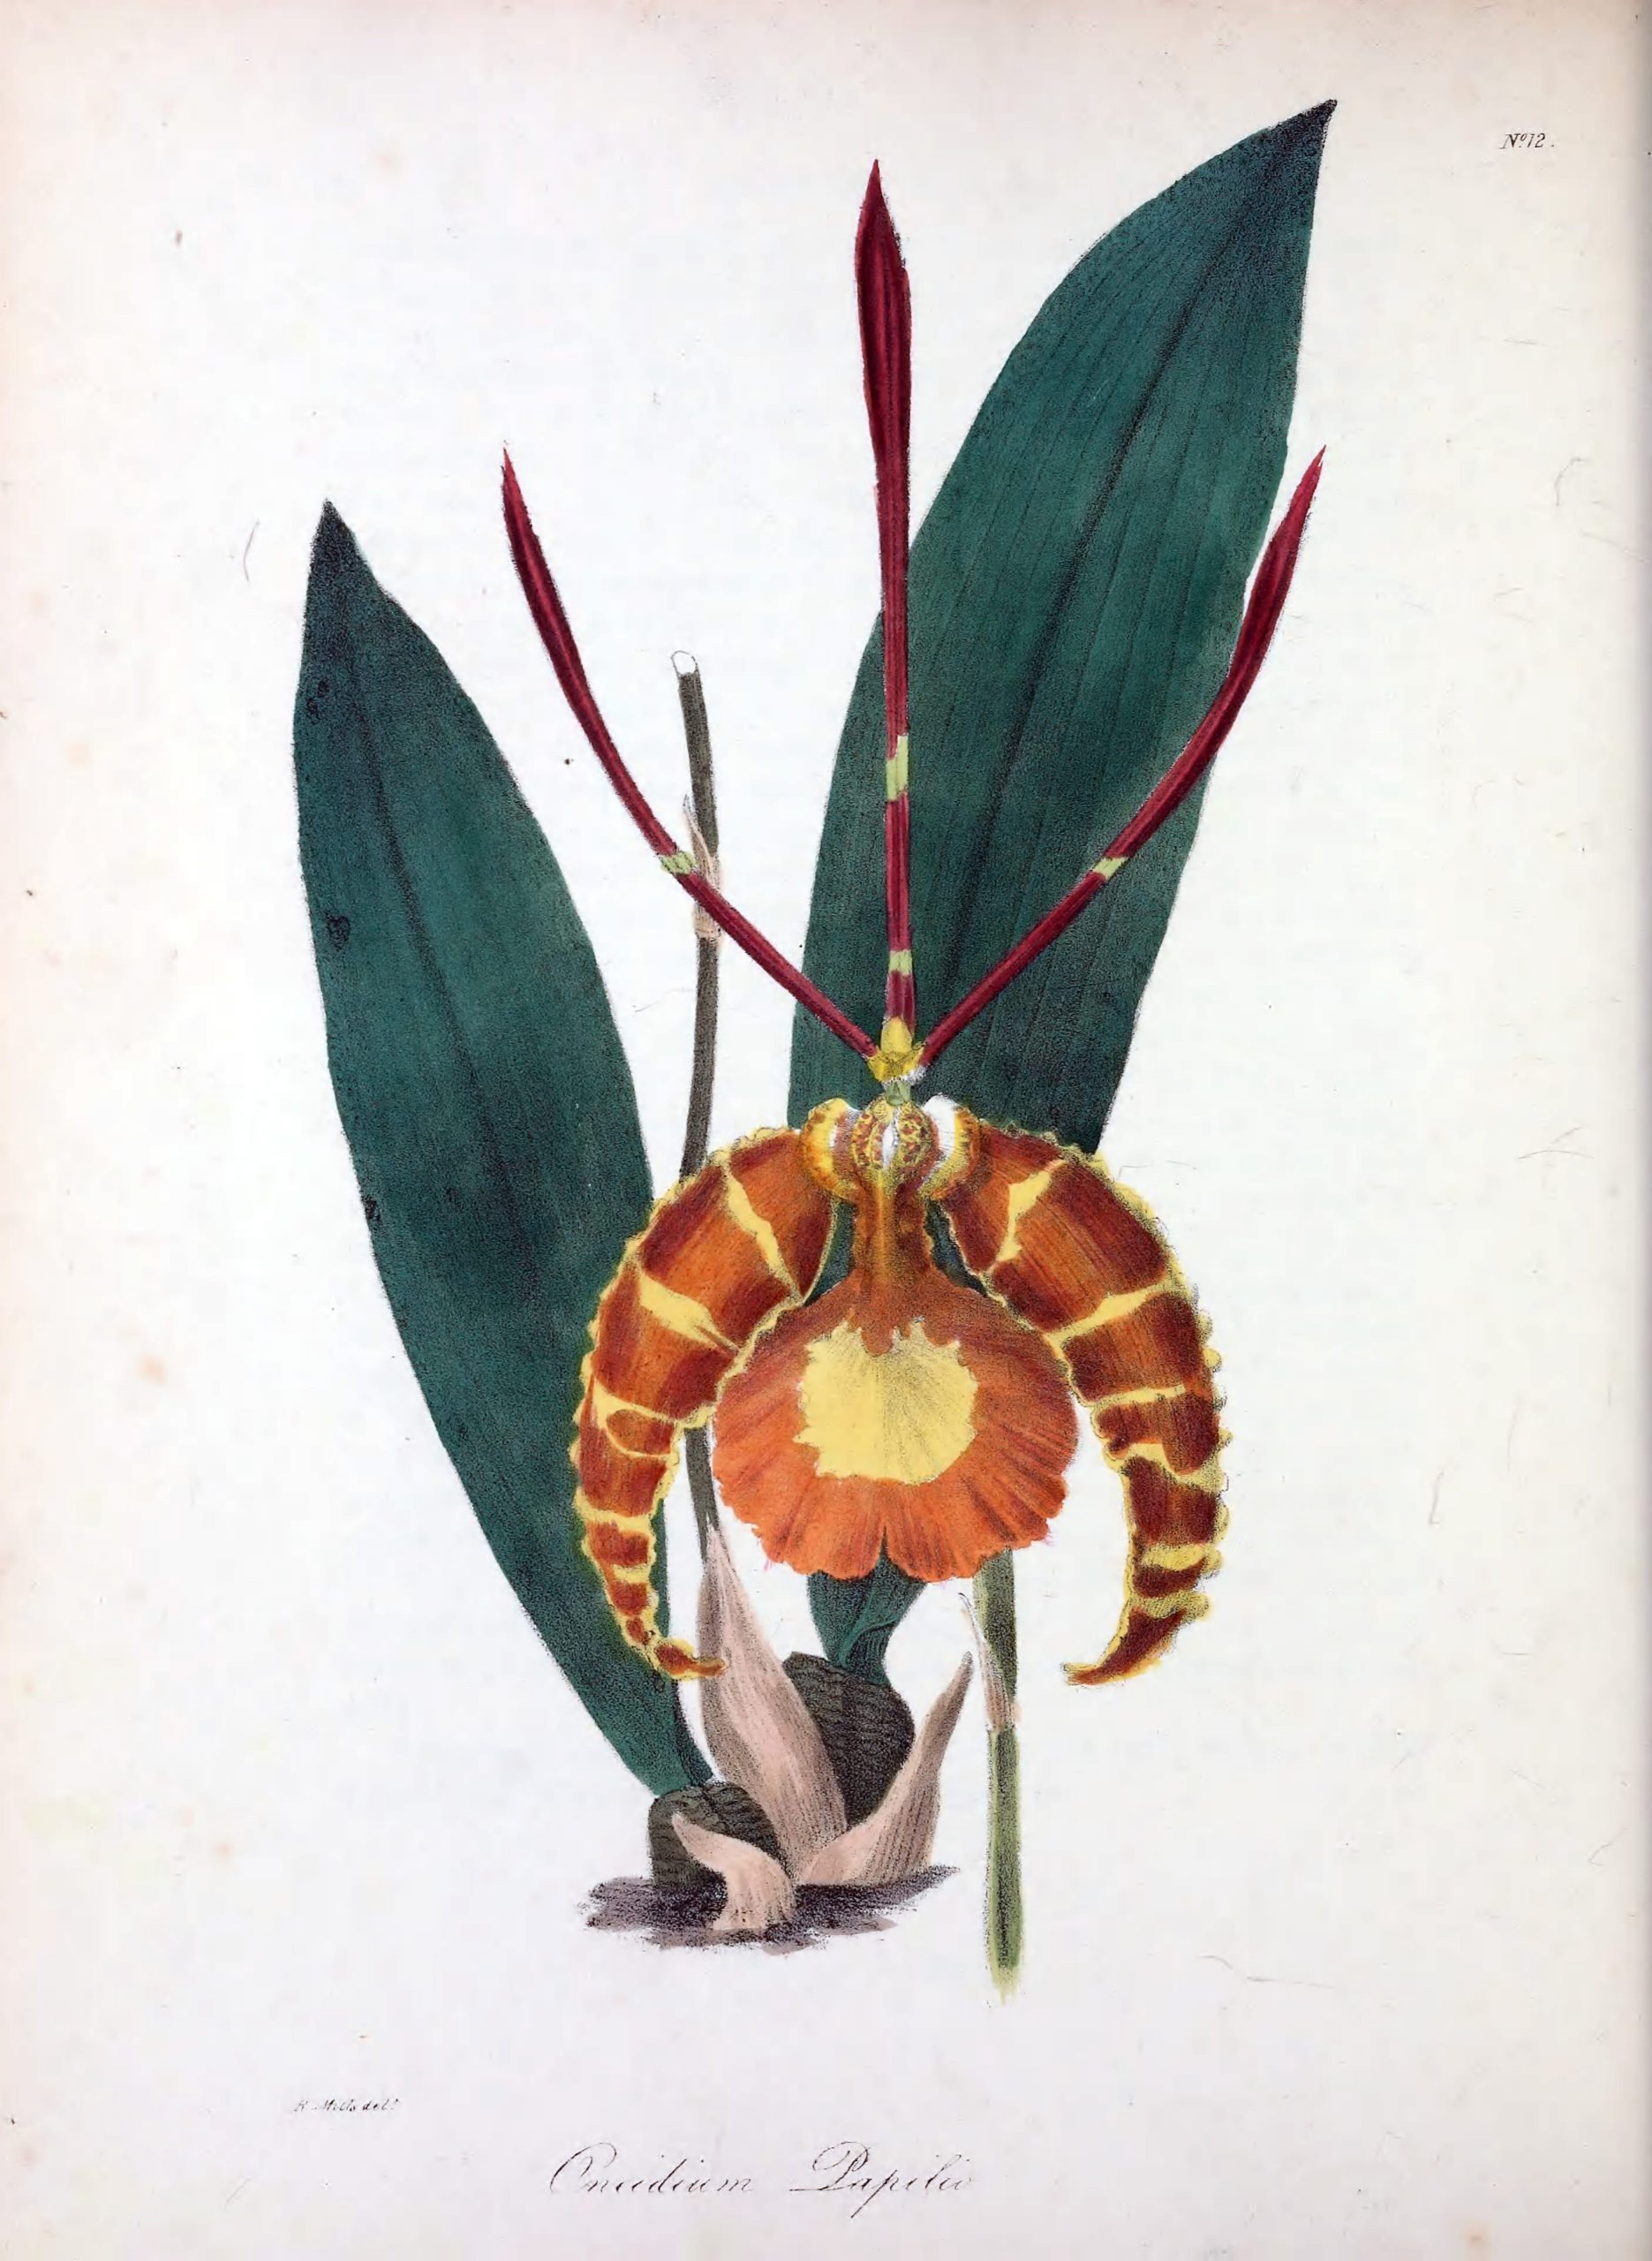 Vintage Botanical Prints - 36 in a series - Oncidium papilla (Butterfly Oncidium) from The Floral Cabinet and Magazine of Exotic Botany (1837)